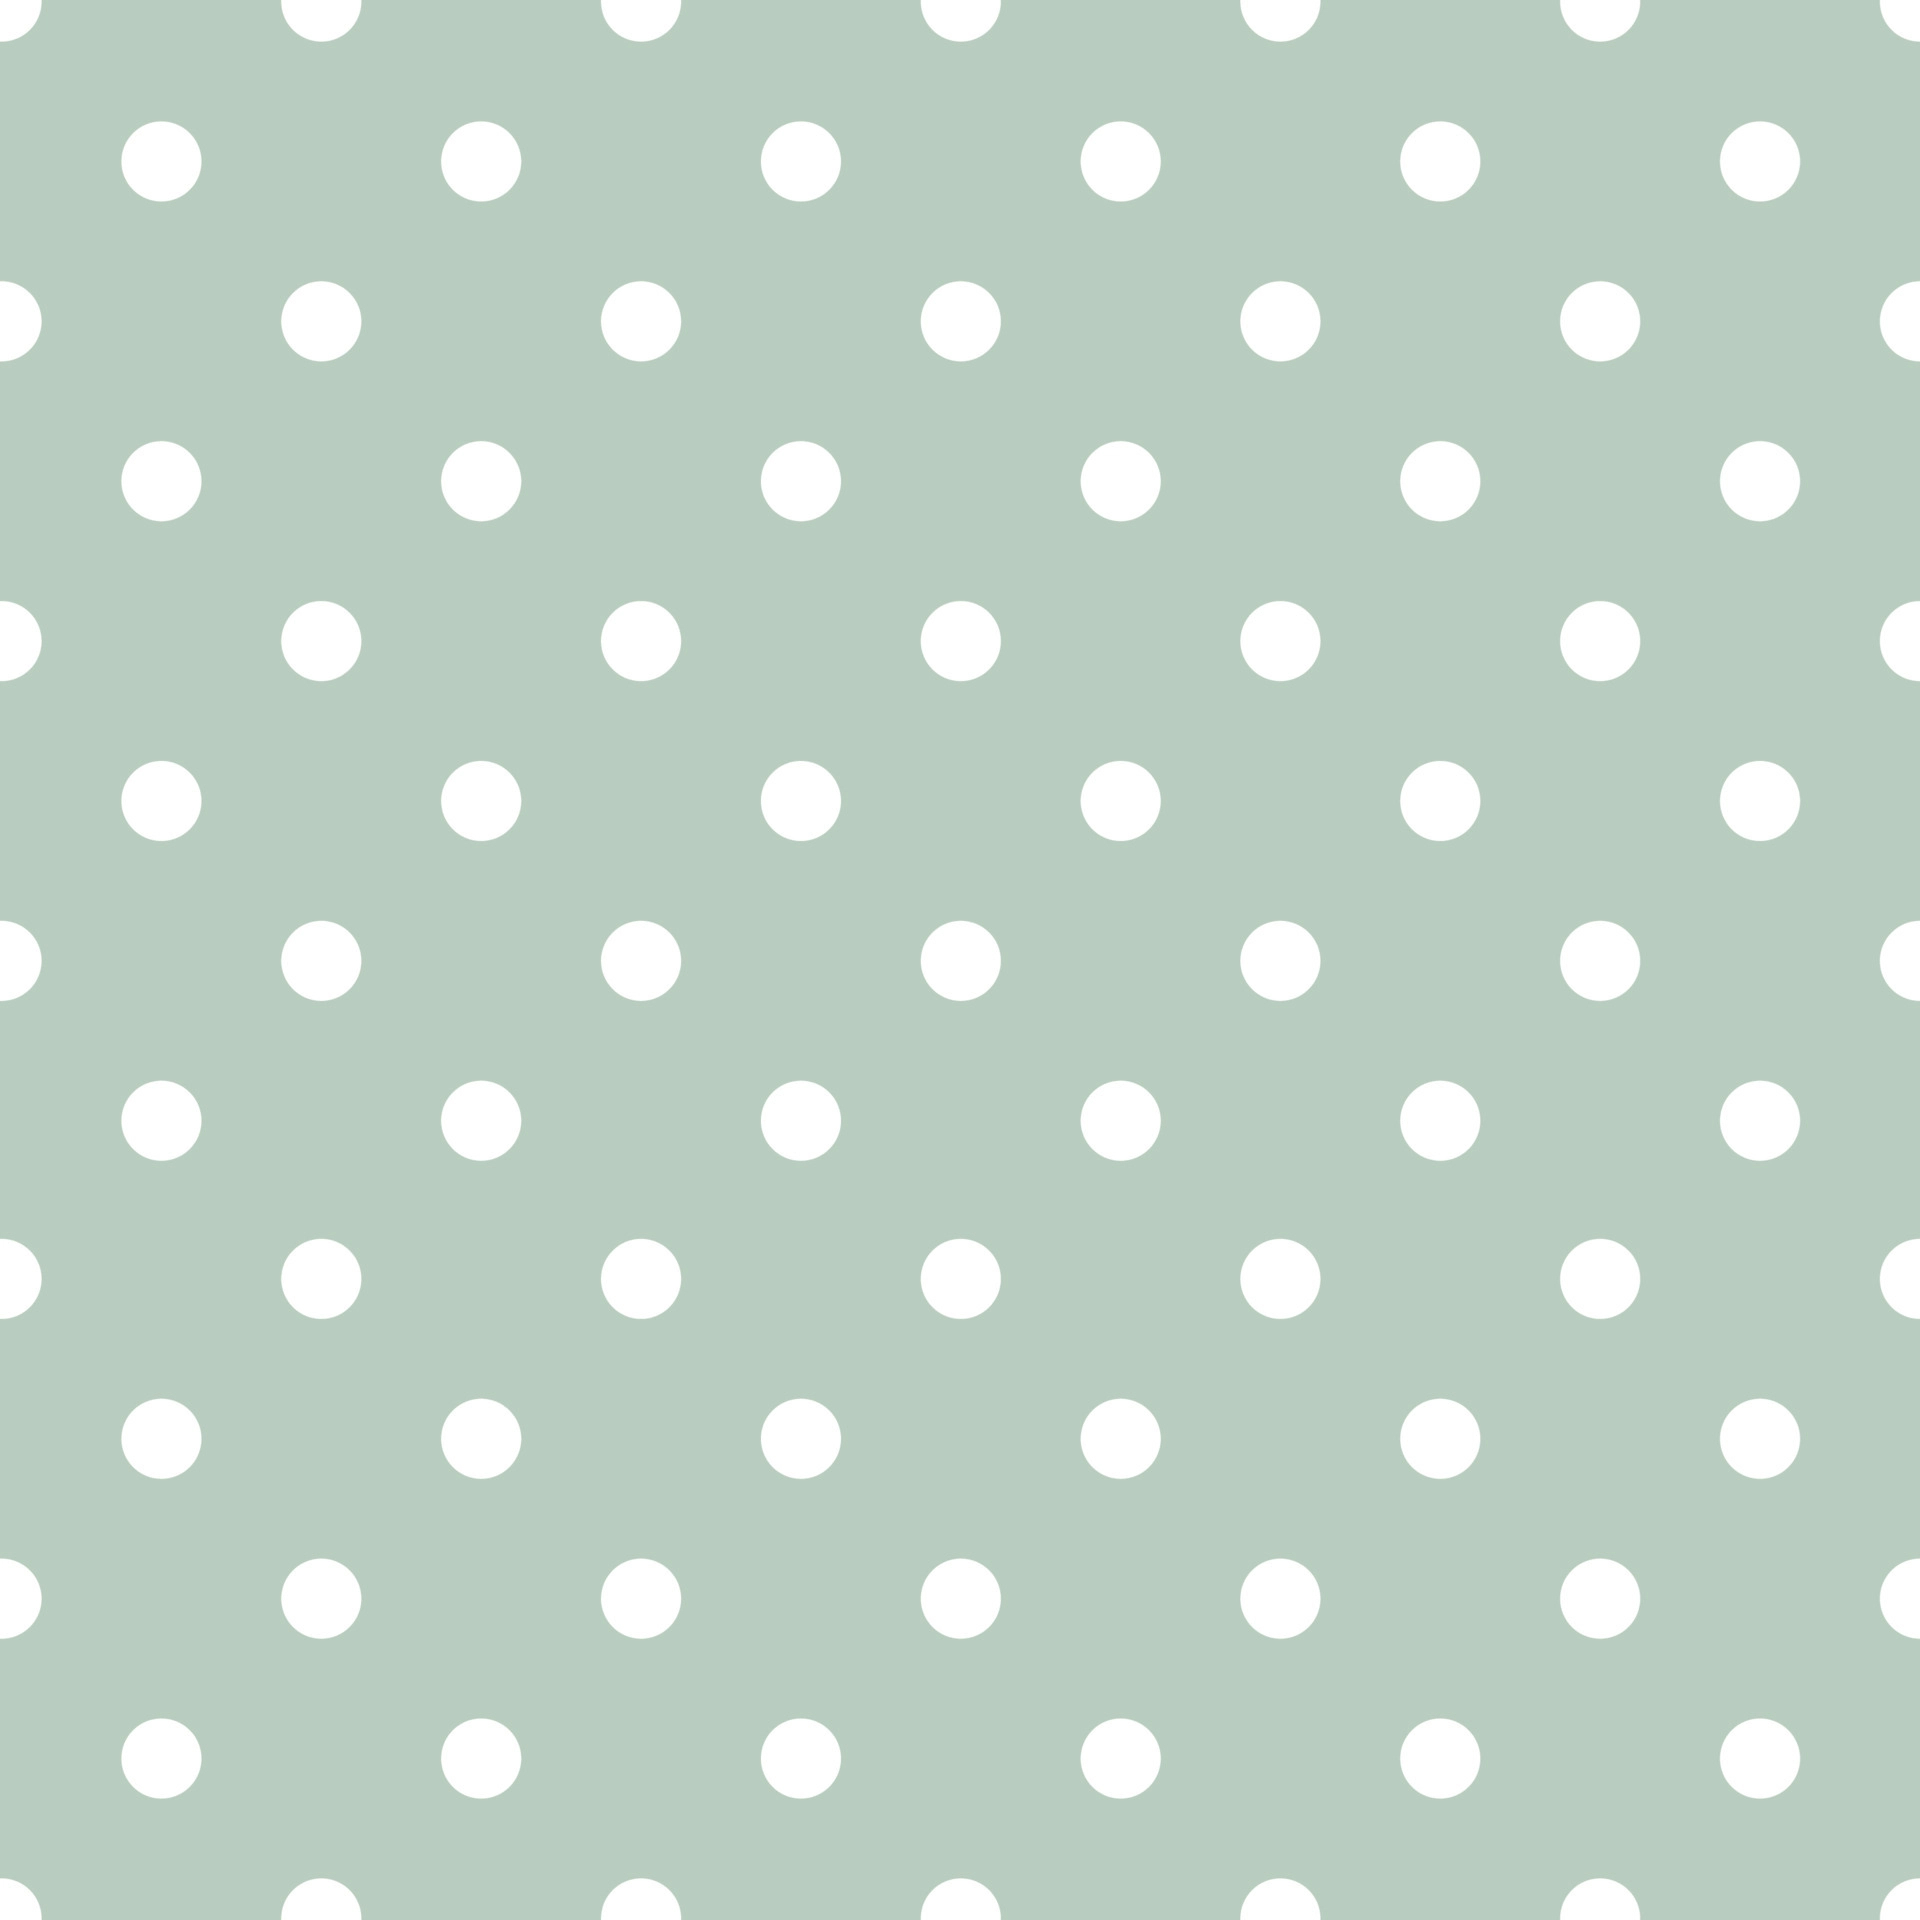 1920x1920 Seamless background with pastel polka dots 5467283 Vector Art